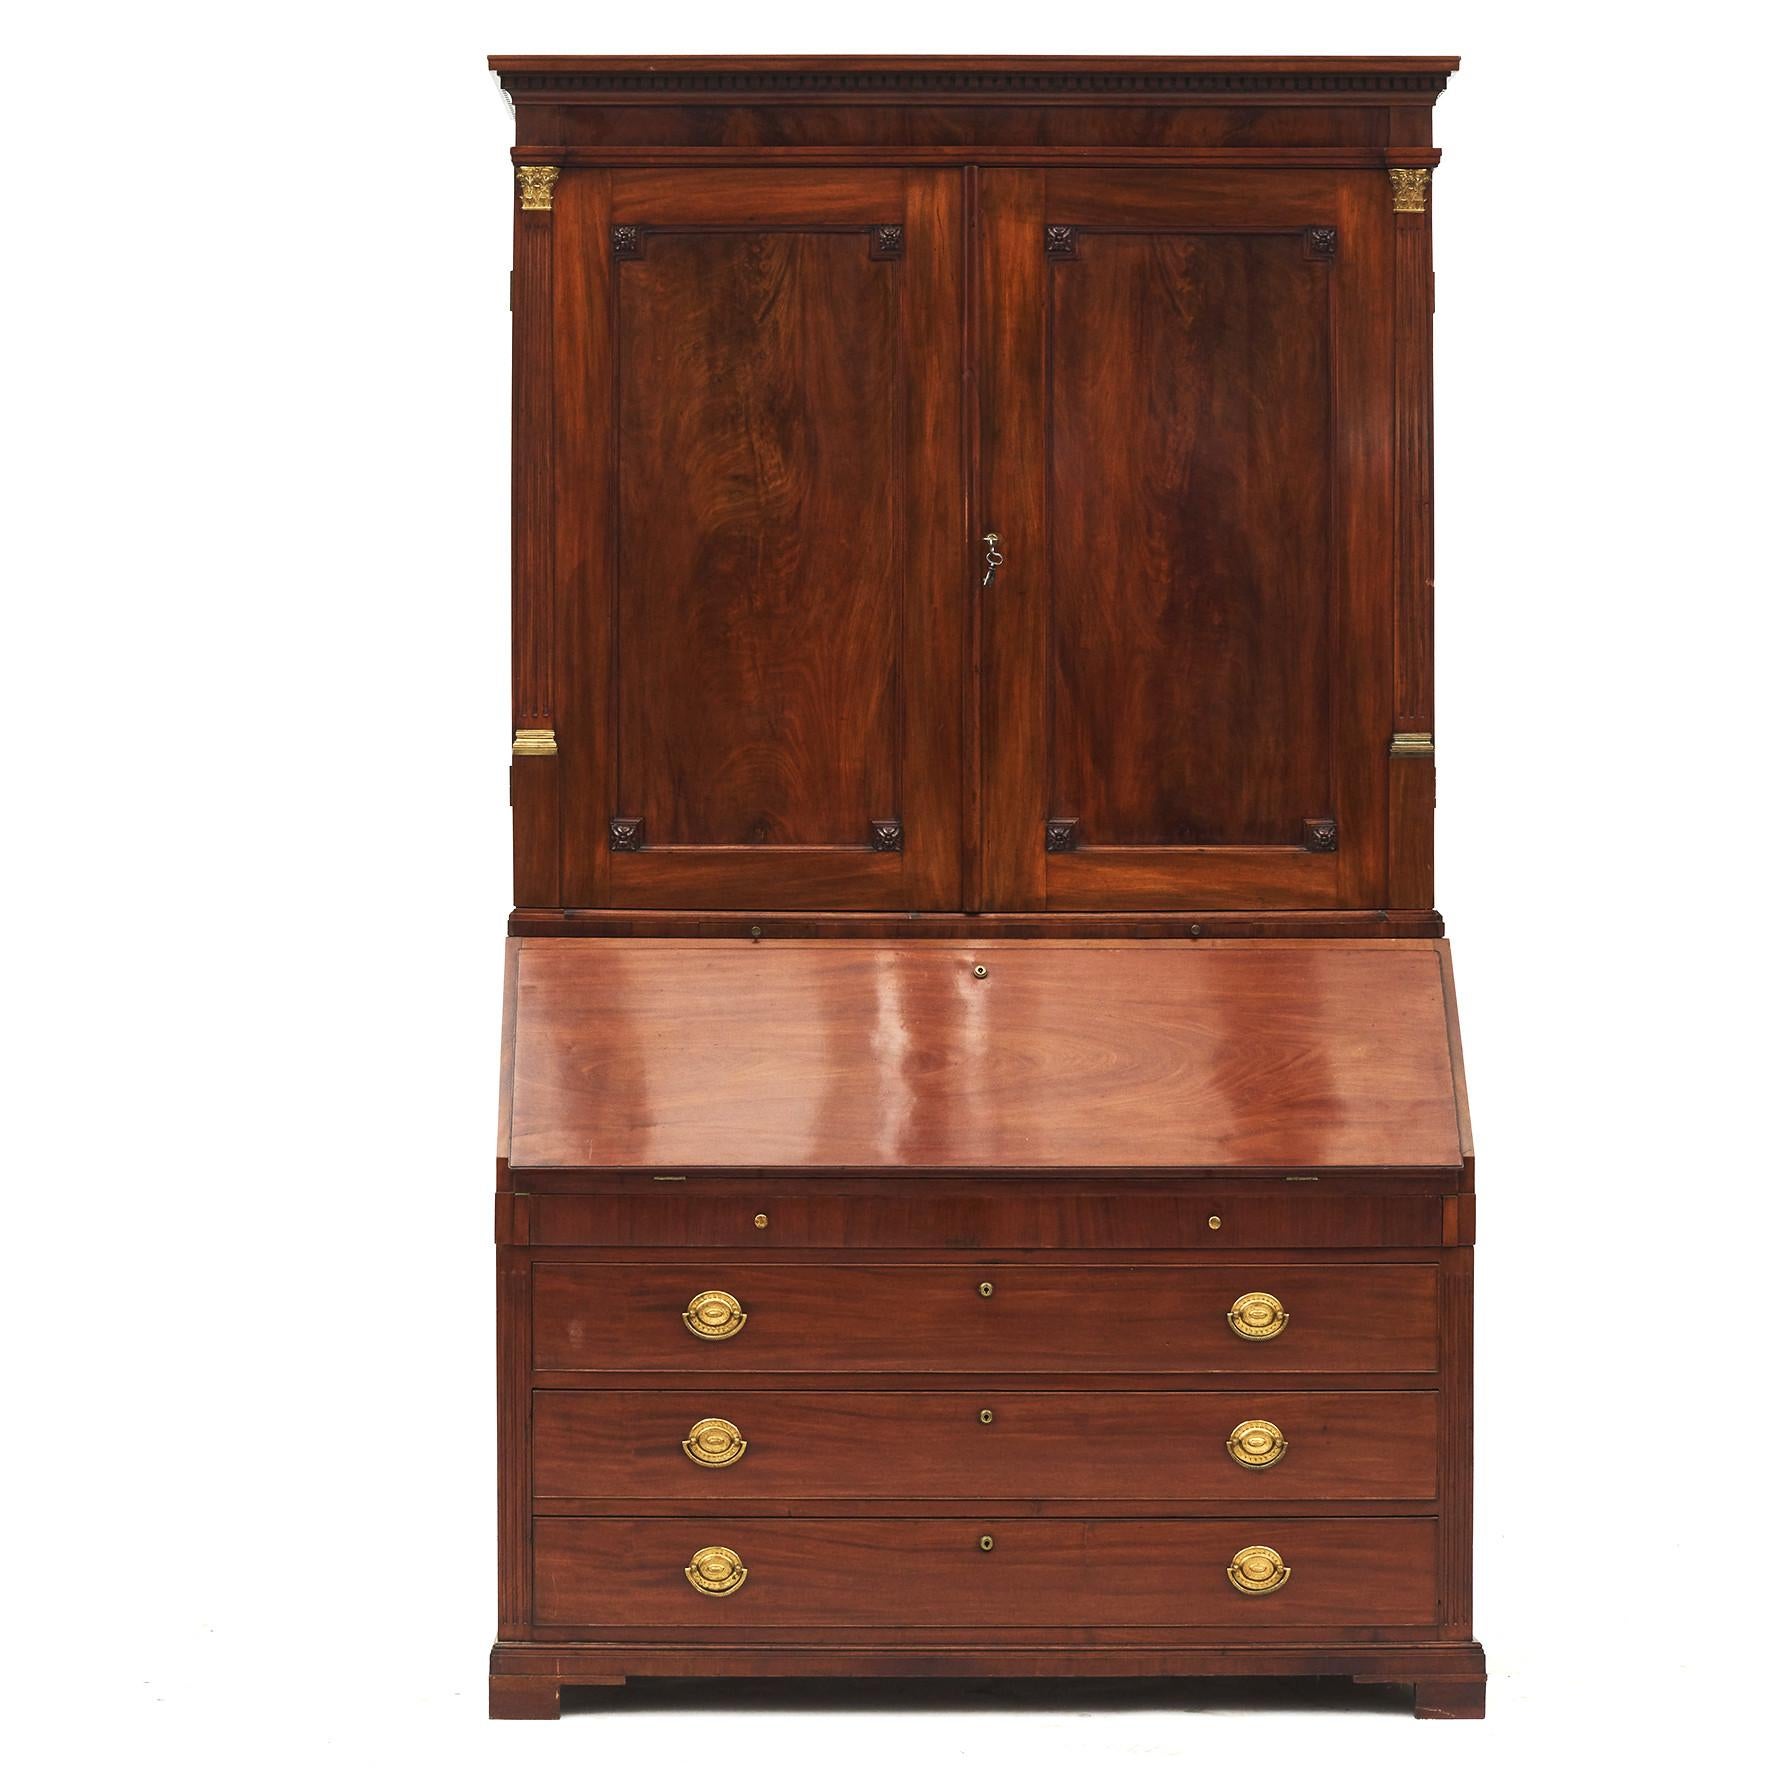 Late 18th-early 19th century mahogany bureau bookcase in the George III manner.
Upper section with dentil crown moulding supported over two doors flanked by fluted pilasters with brass capitals.
Lower section with three large drawers below a small